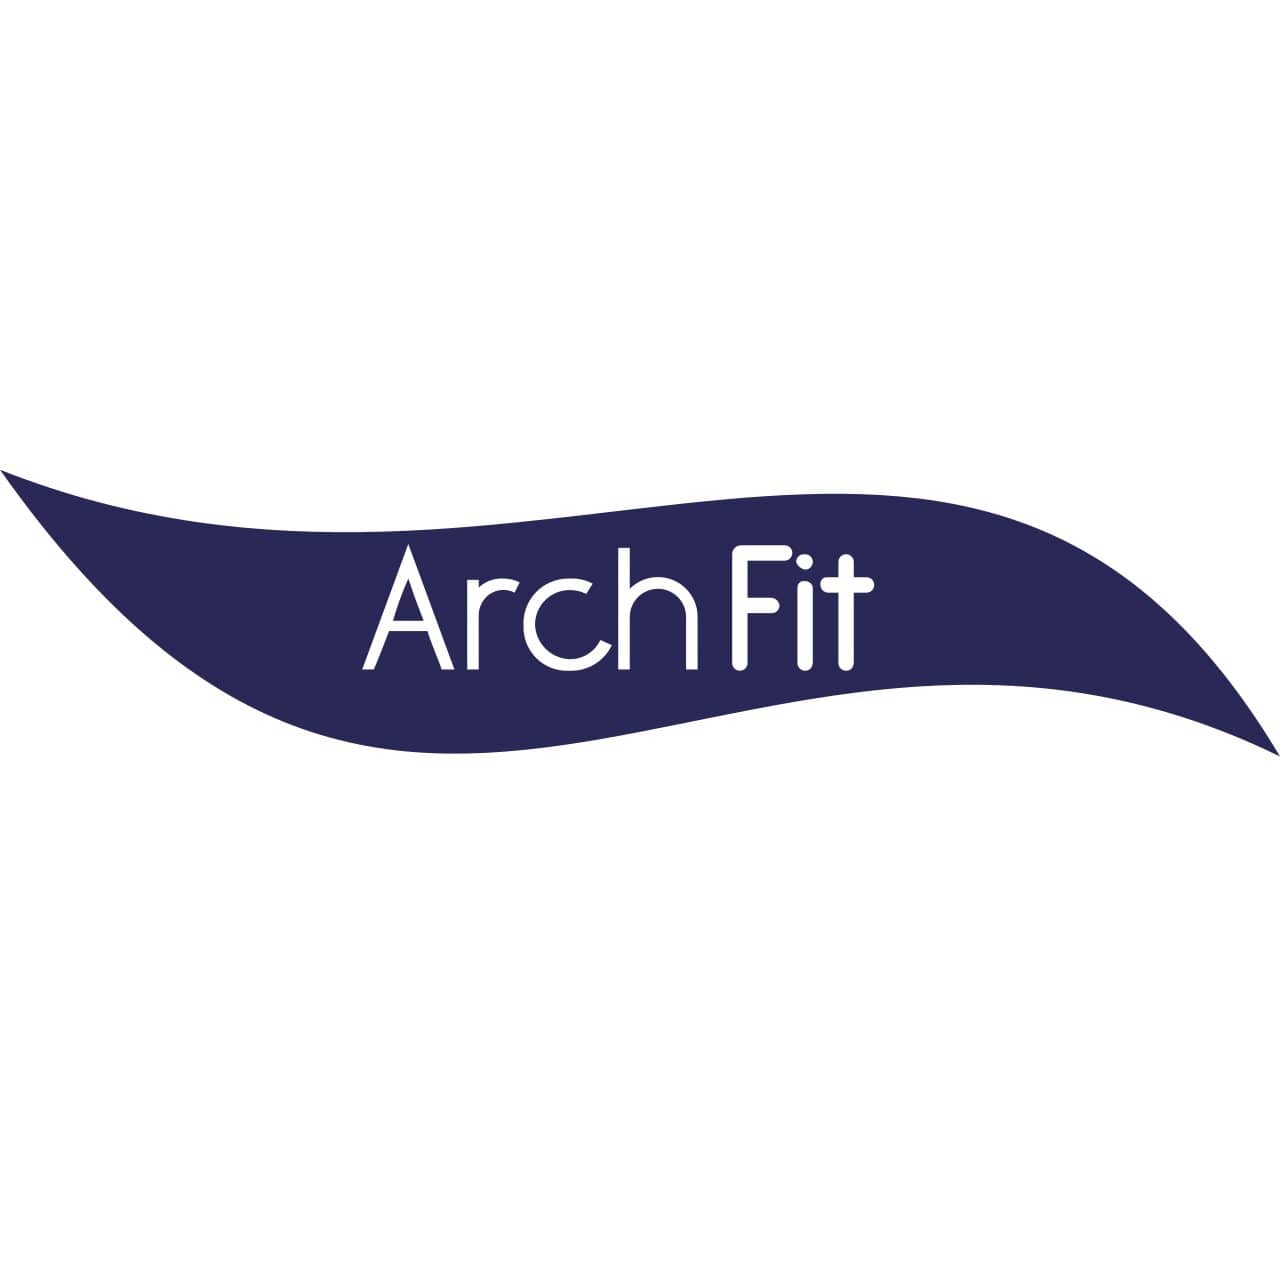 ARCH FIT